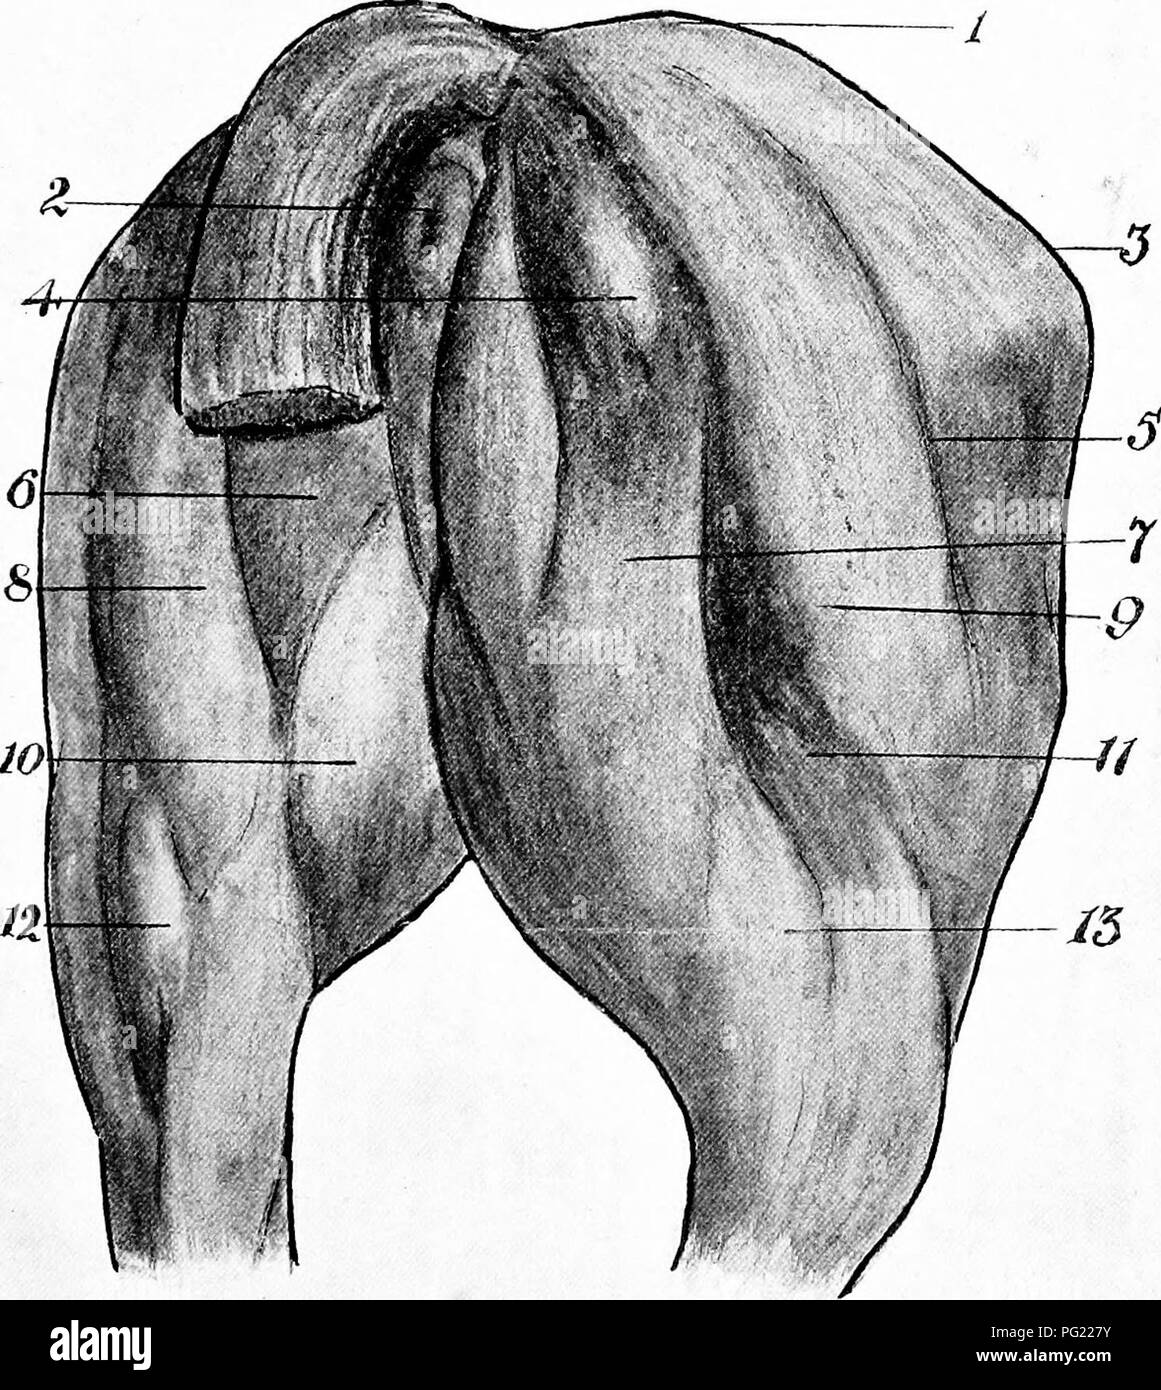 . The surgical anatomy of the horse ... Horses. Plate II.—The Hind Quarter viewed from behind I. Croup. 2. Anus. 3. Angle of haunch. 4. Elevation formed by tuber ischii. 5. Groove between biceps femoris and posterior arm of superficial gluteus. 5. Elevation formed bj'semimembranosus. 7 and 8. Elevations formed by semitendinosus. g. Elevation formed by anterior or great head of biceps femoris. 10. Elevation formed by gracilis. 11 and 13. Elevations formed by two remaining heads of biceps femoris. 12. Gastrocnemius.. Please note that these images are extracted from scanned page images that may h Stock Photo